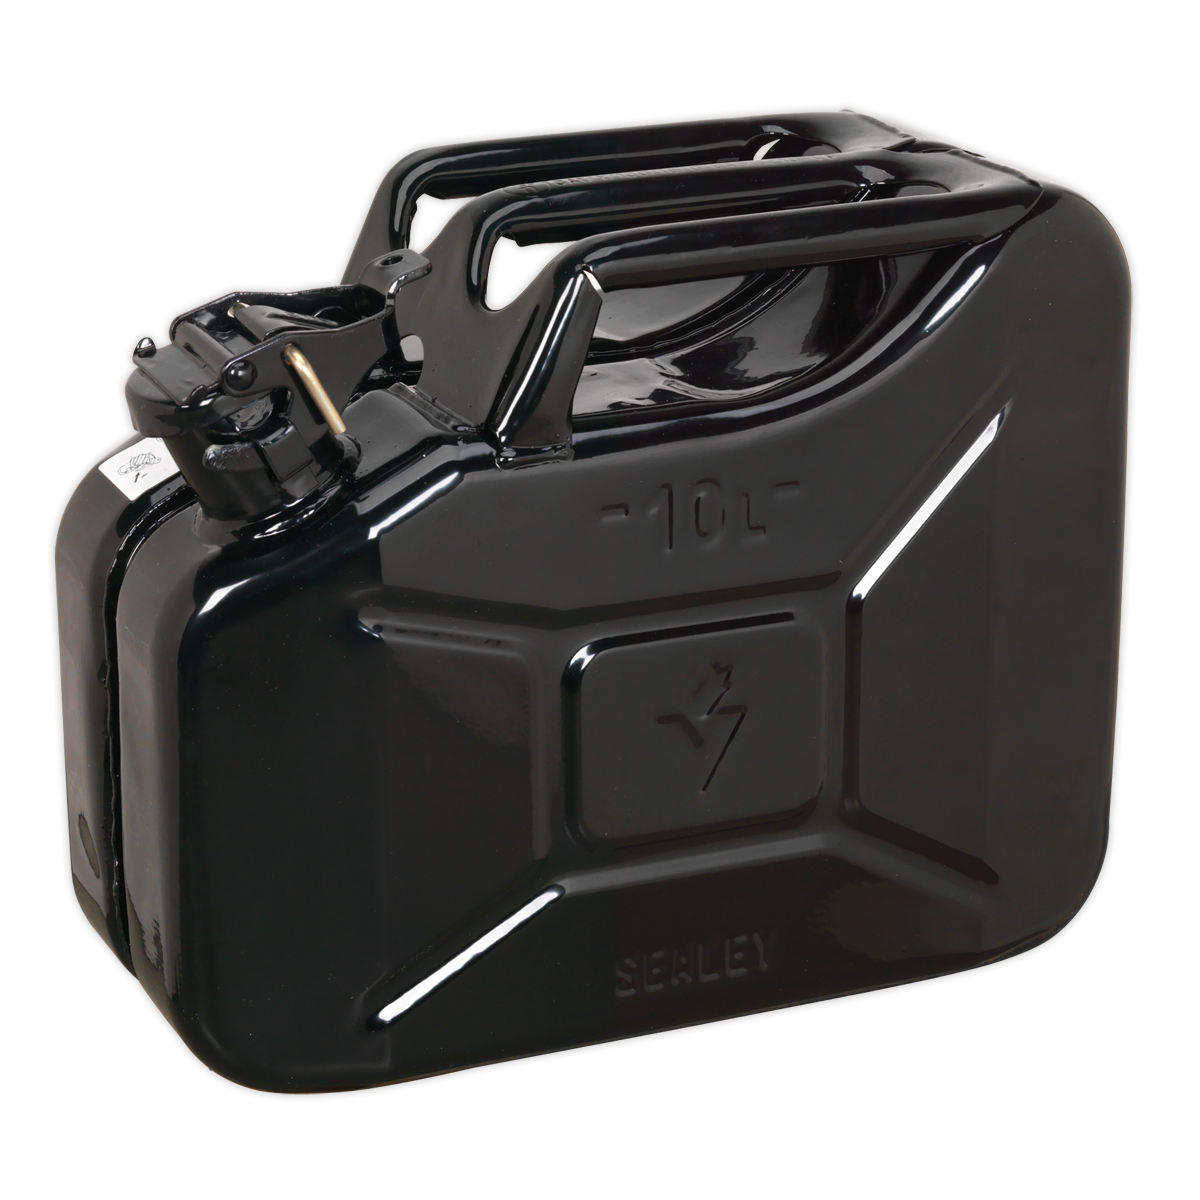 Sealey Jerry Can 10L - Black